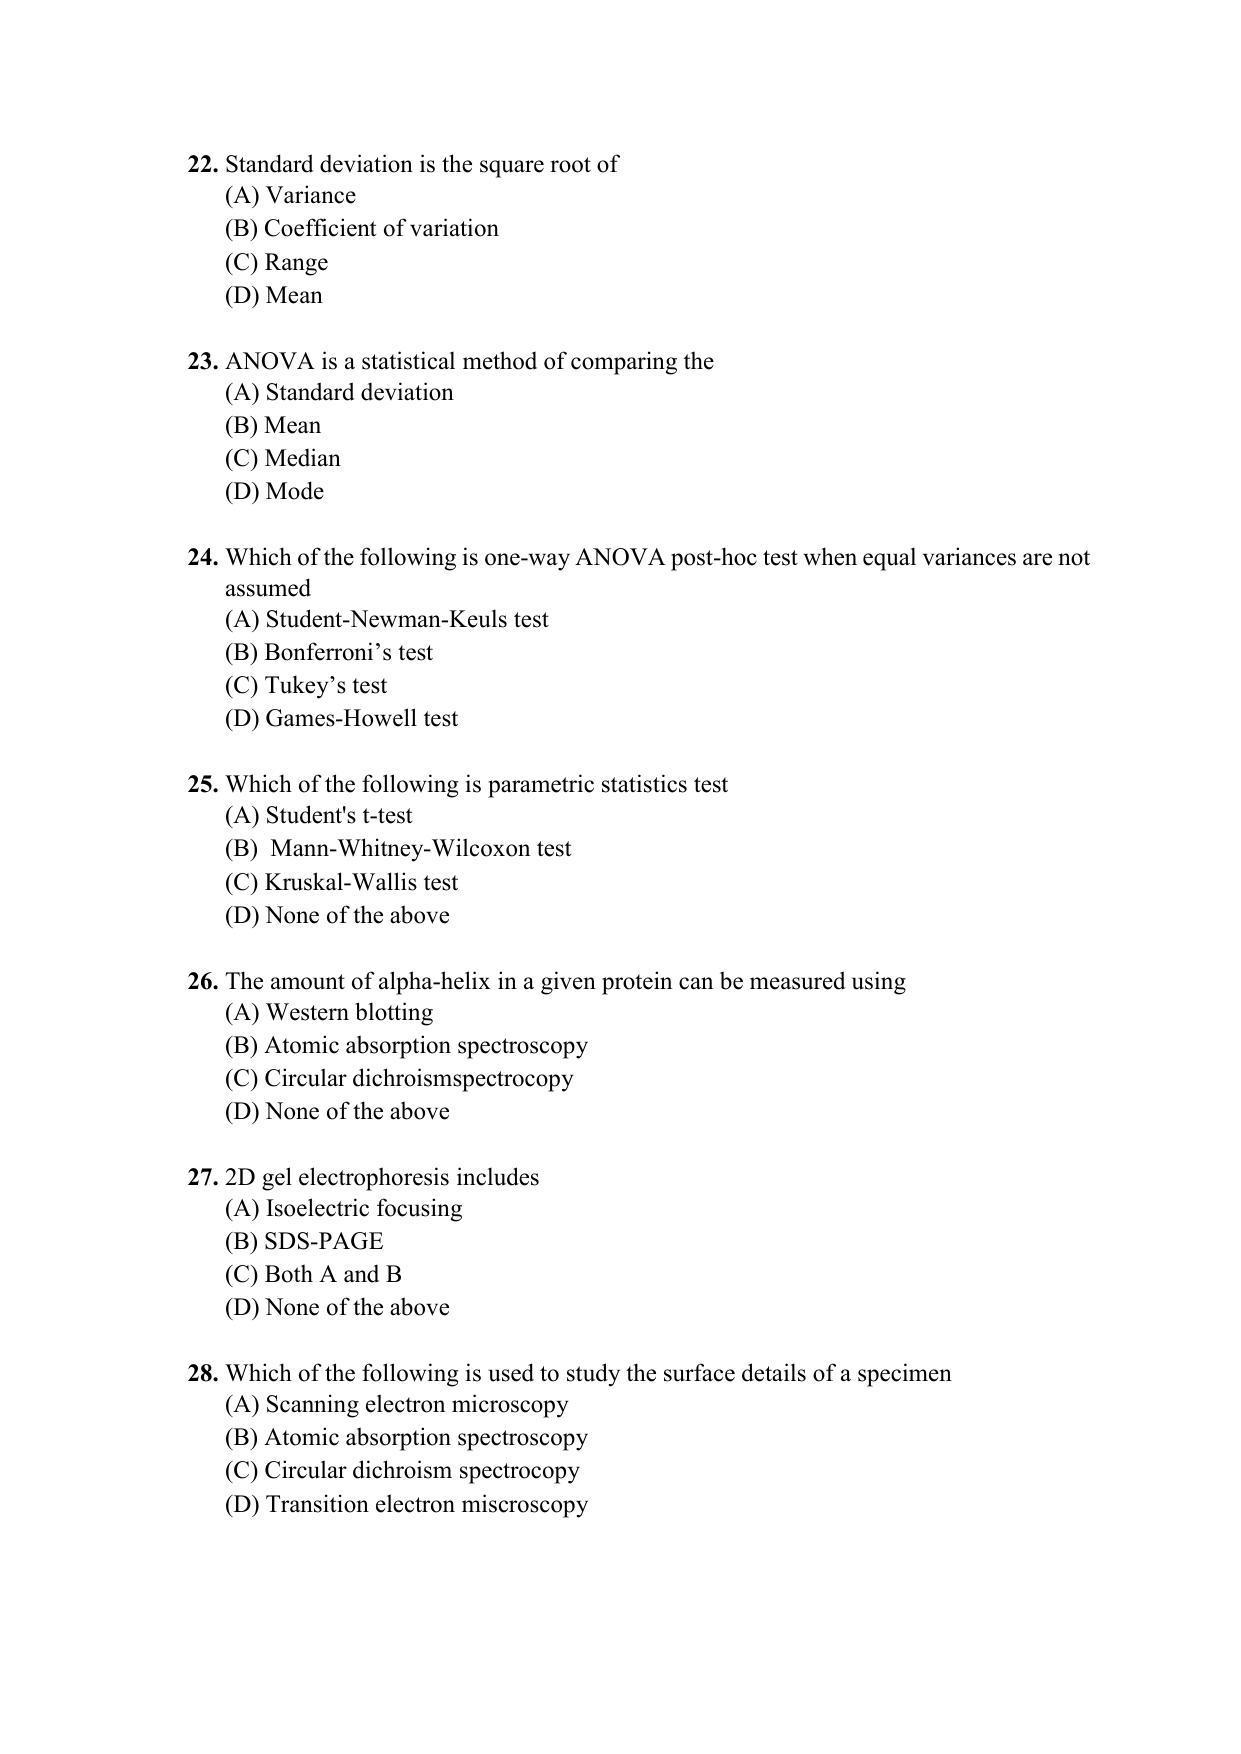 PU MPET Anthropology 2022 Question Papers - Page 14